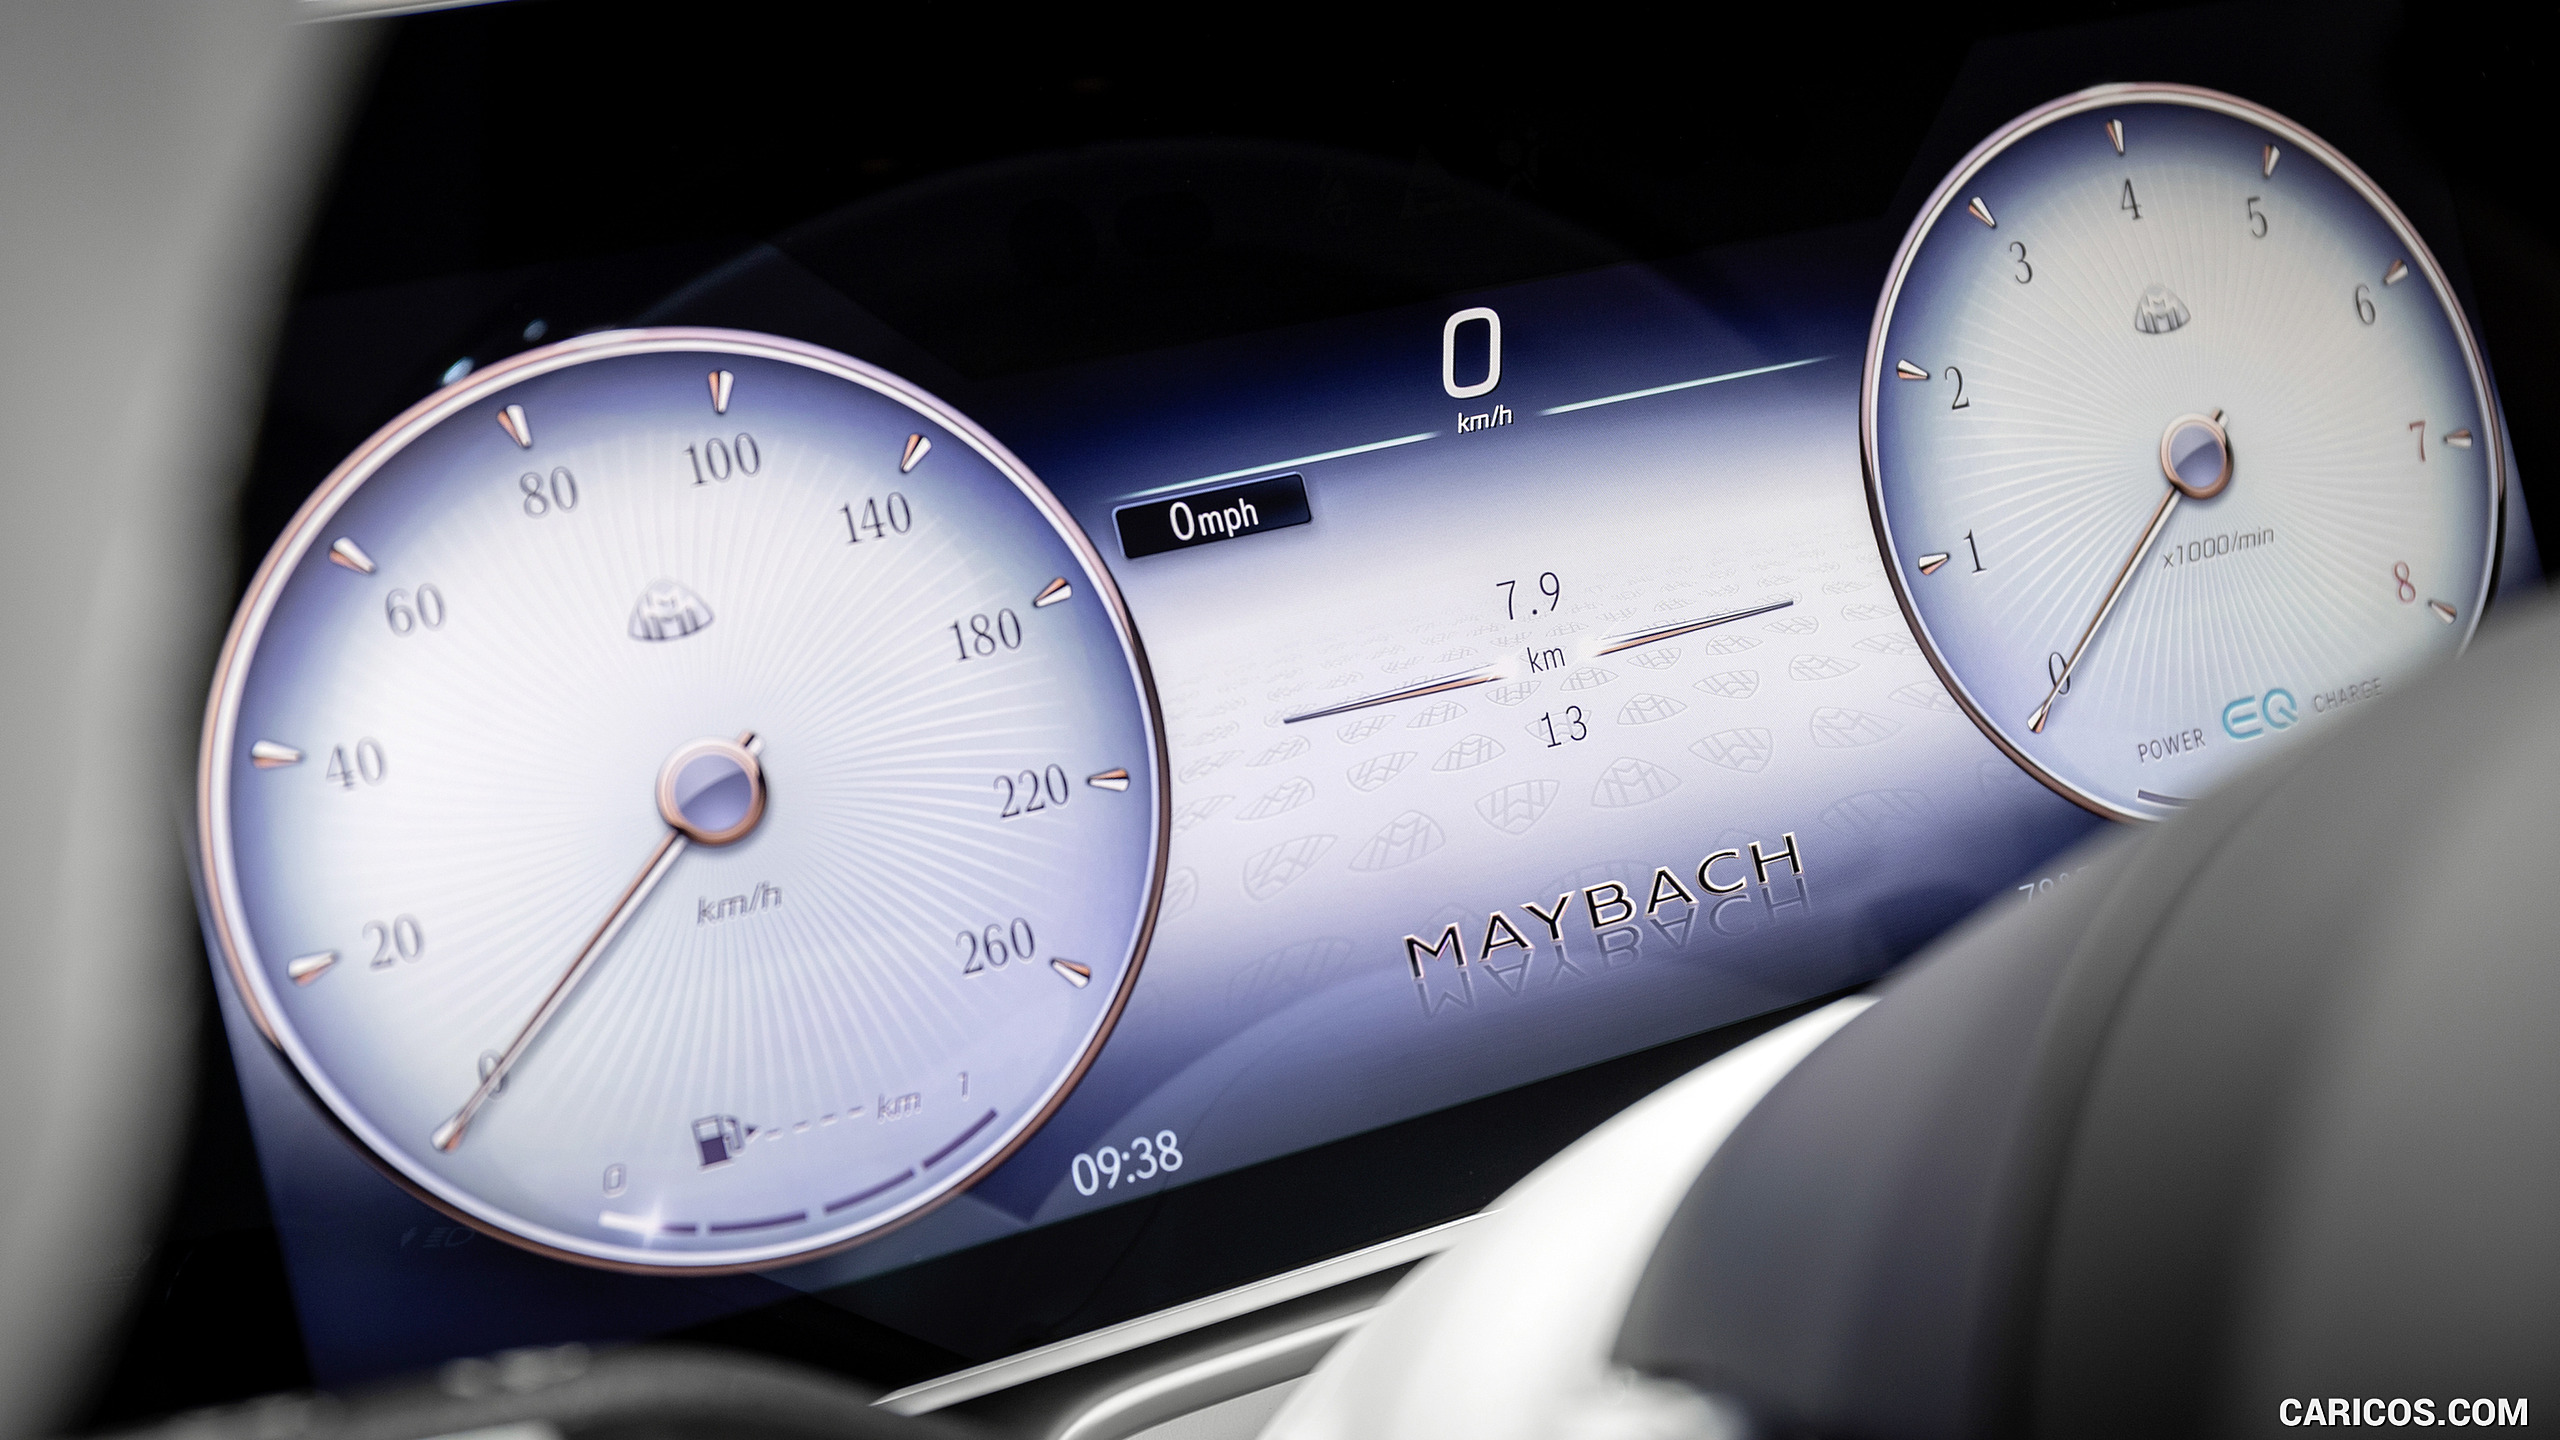 2021 Mercedes-Maybach S-Class - Digital Instrument Cluster, #142 of 157